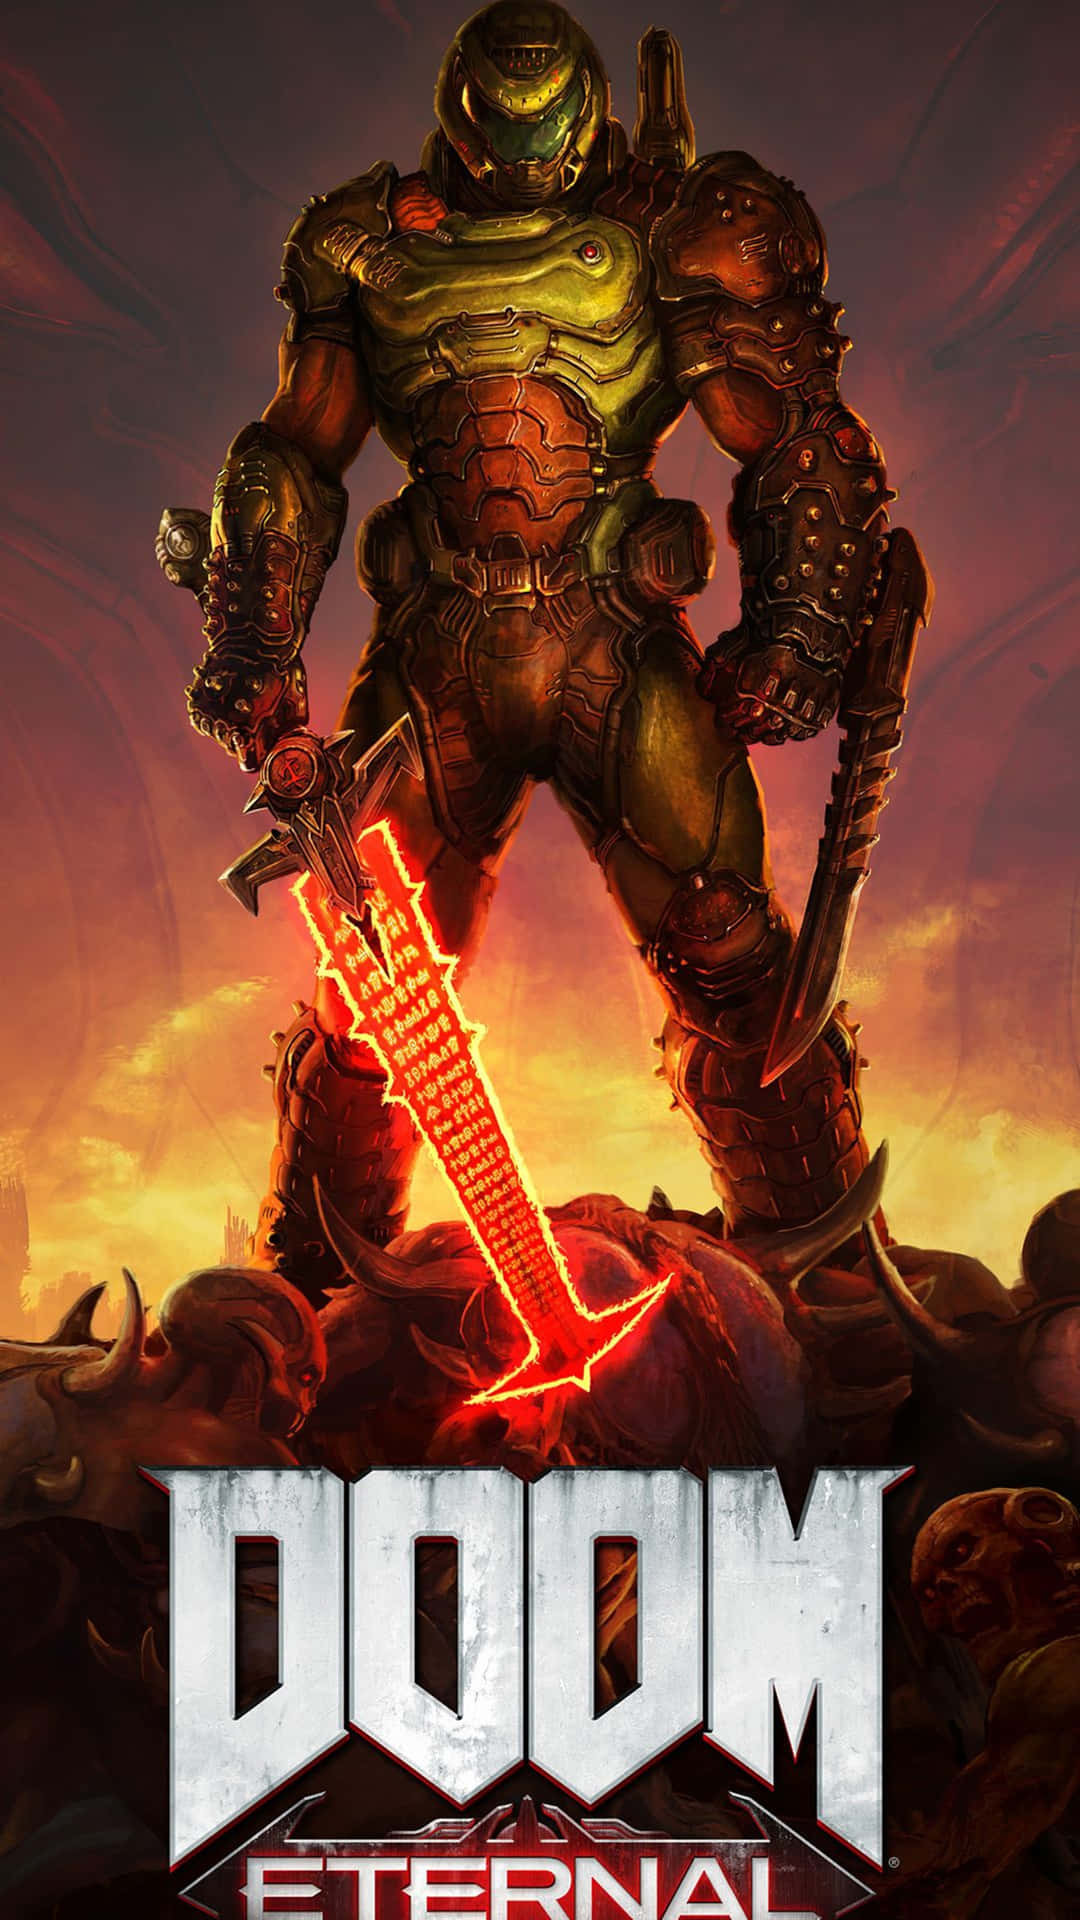 Experience The Intense Action And Heart-pumping Adventure Of Doom Eternal In Breathtaking, 4k